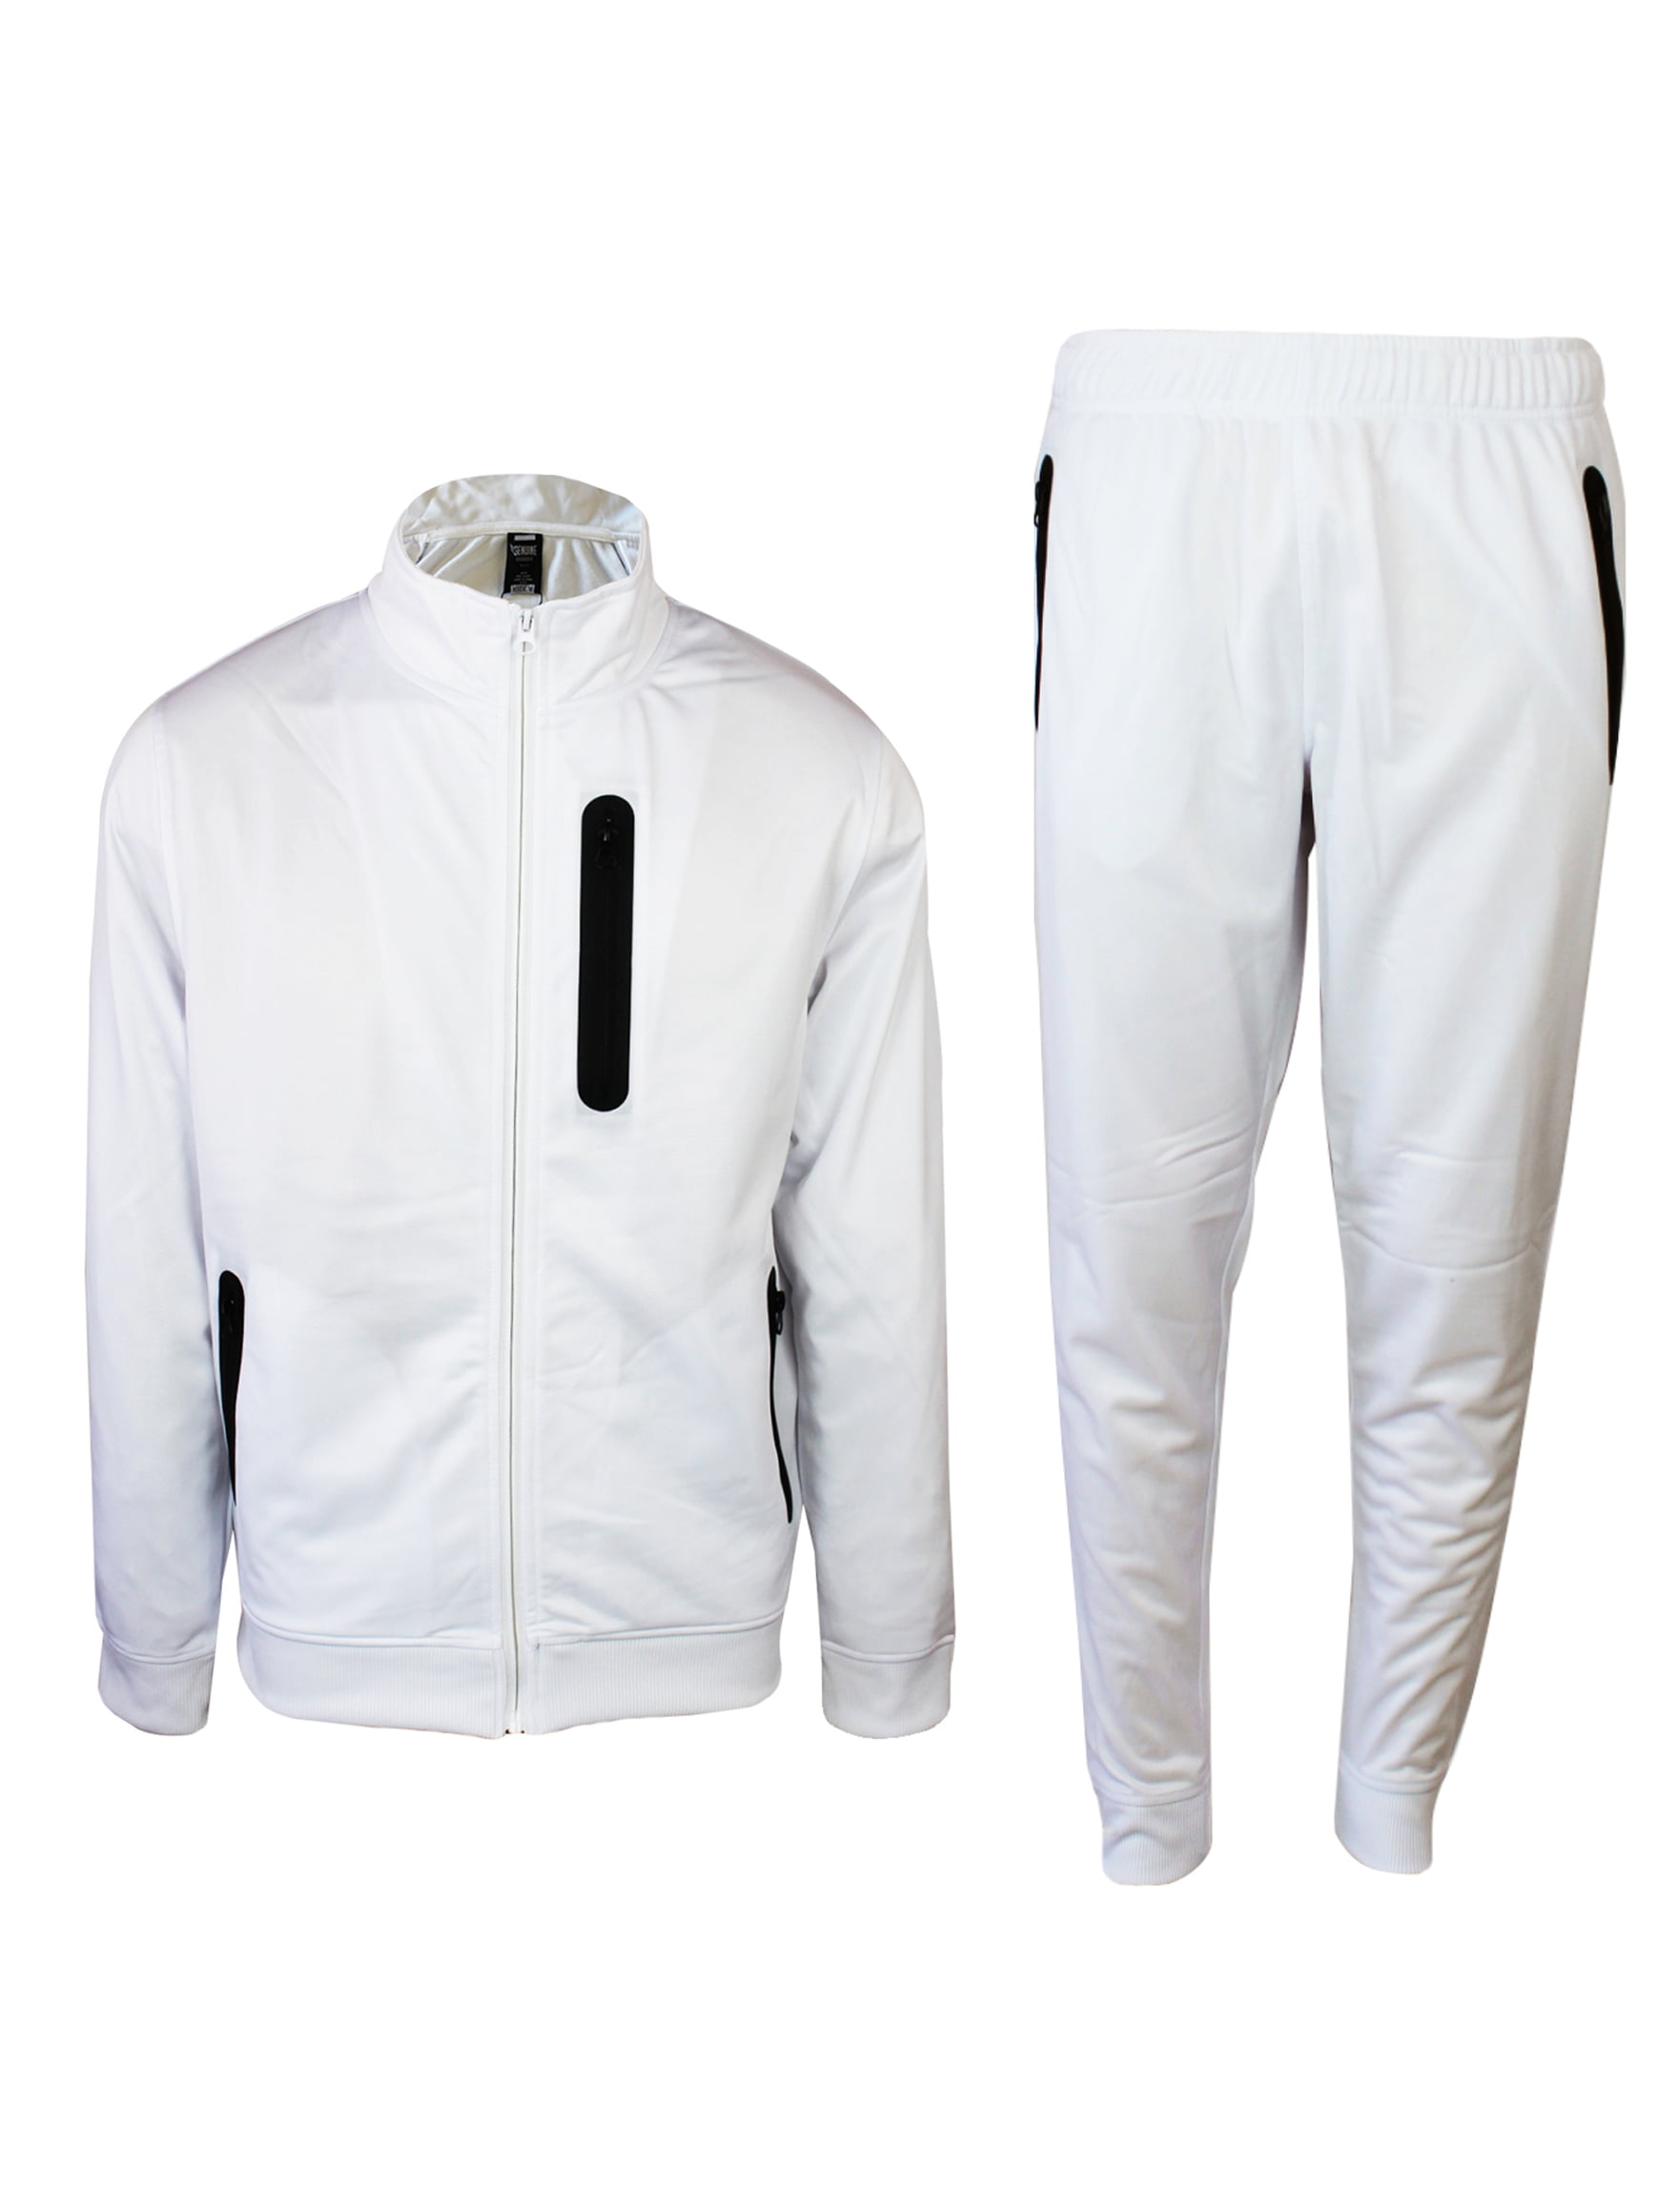 ALLAK Athletic Tracksuit Full Zip Casual Jogging Gym Sweat Suits